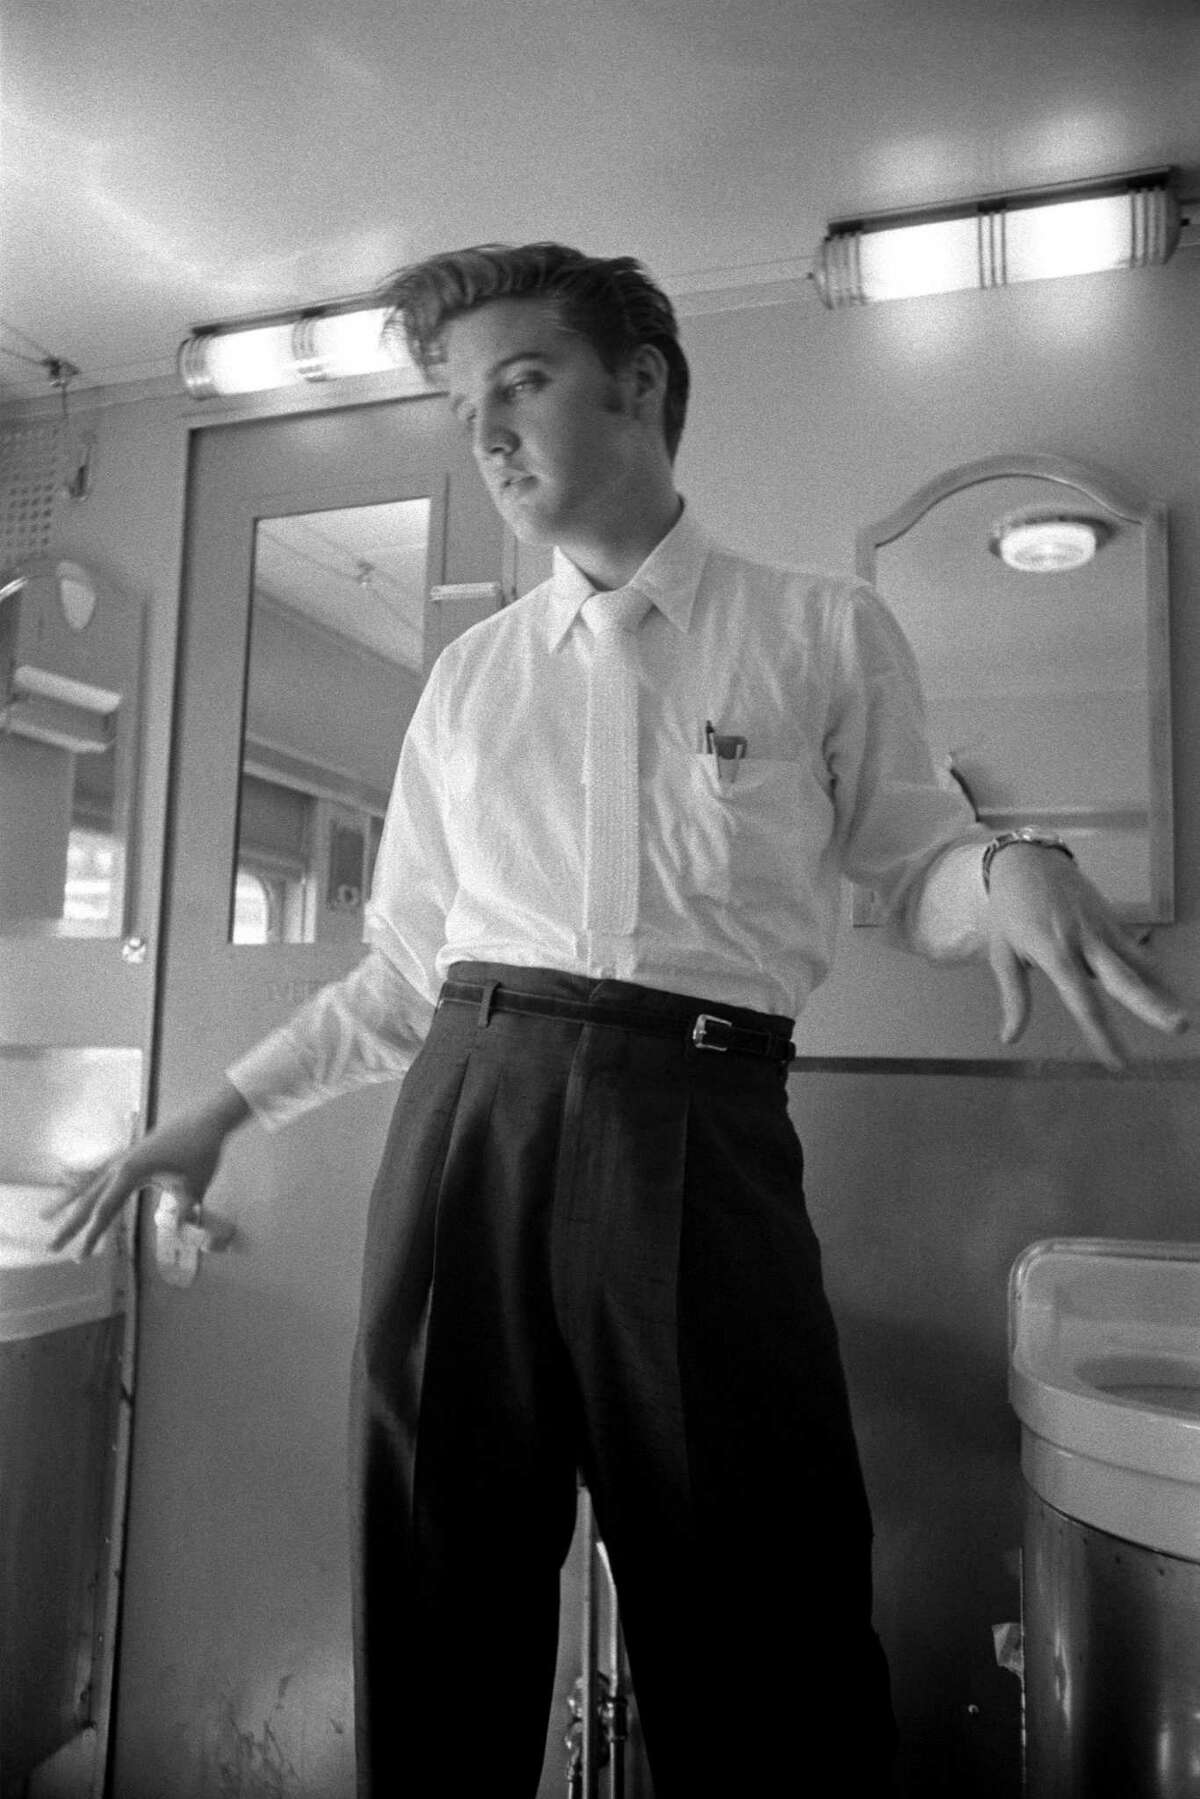 Elvis Presley shaking his hands dry following a wash on a train from New York City to Memphis, Tennessee, in July 1956. The image is found in the exhibition "Elvis at 21: Photographs by Arthur Wertheimer" at the National Portrait Gallery in Washington, D.C., through January 23. (National Portrait Gallery/MCT)